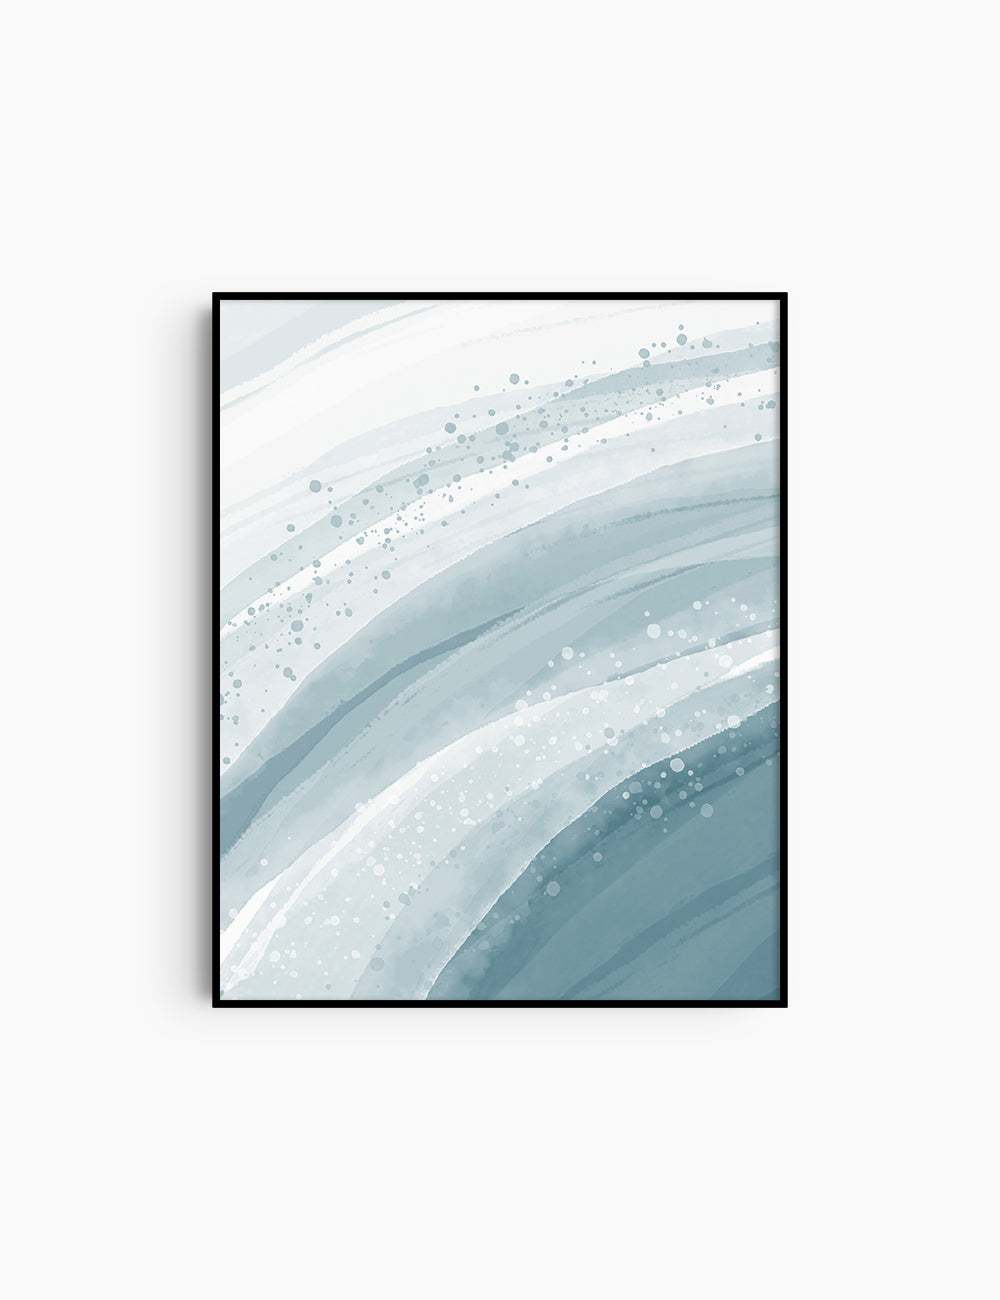 WATERCOLOR ABSTRACT. Blue Aesthetic. Abstract Watercolor Painting. Printable Wall Art. - PAPER MOON Art & Design